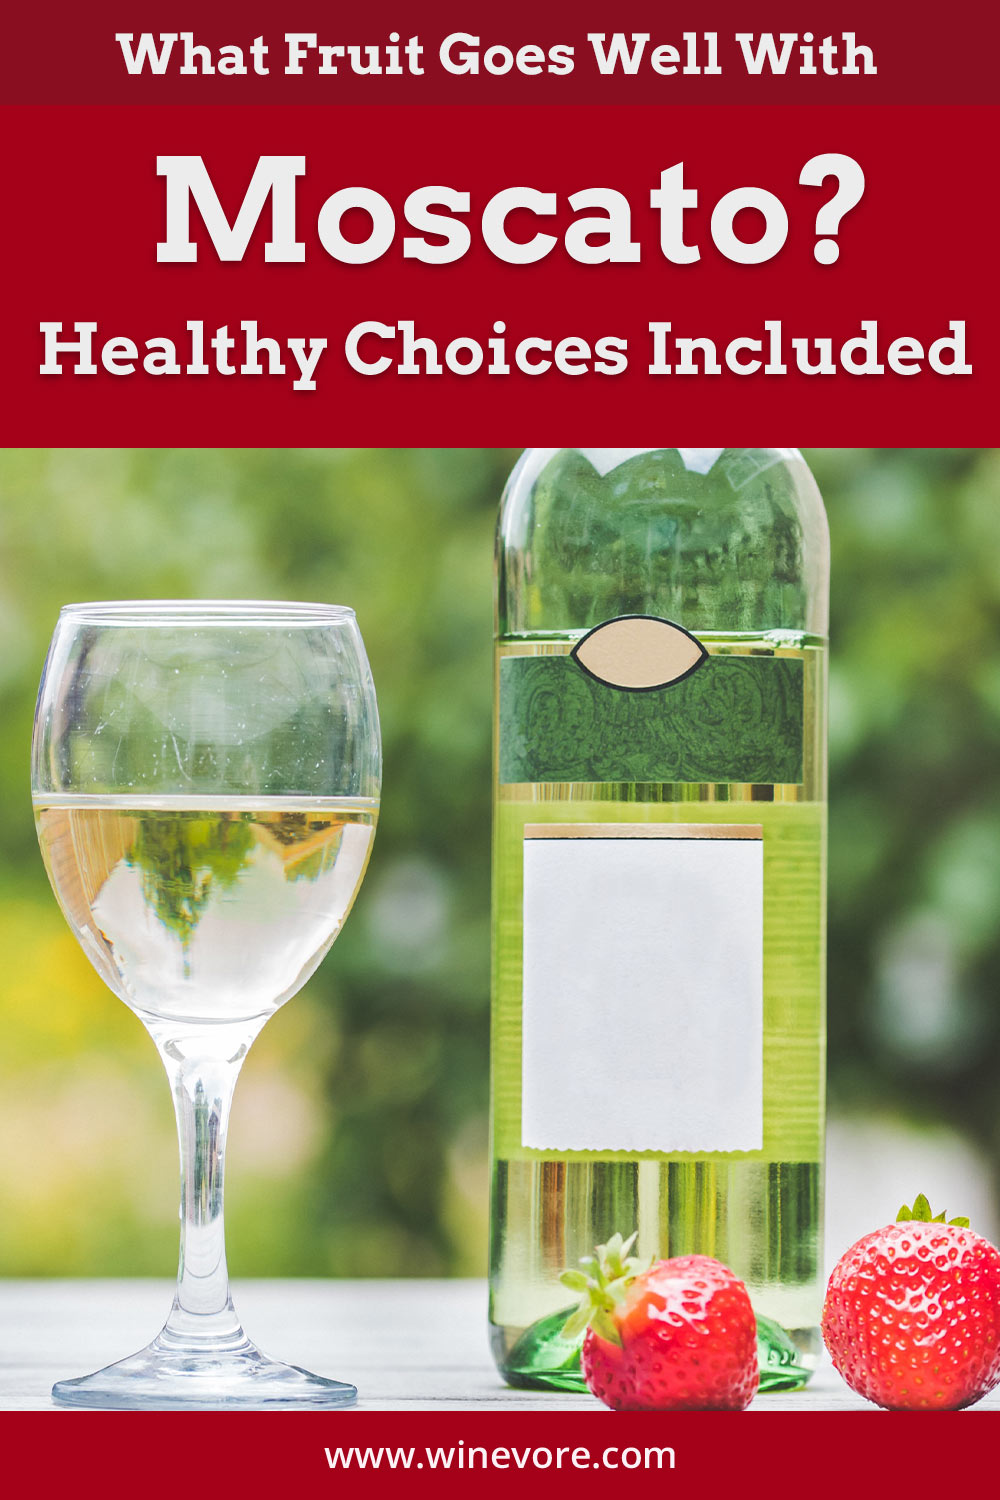 A glass of Moscato near a bottle - what fruit goes well with it?